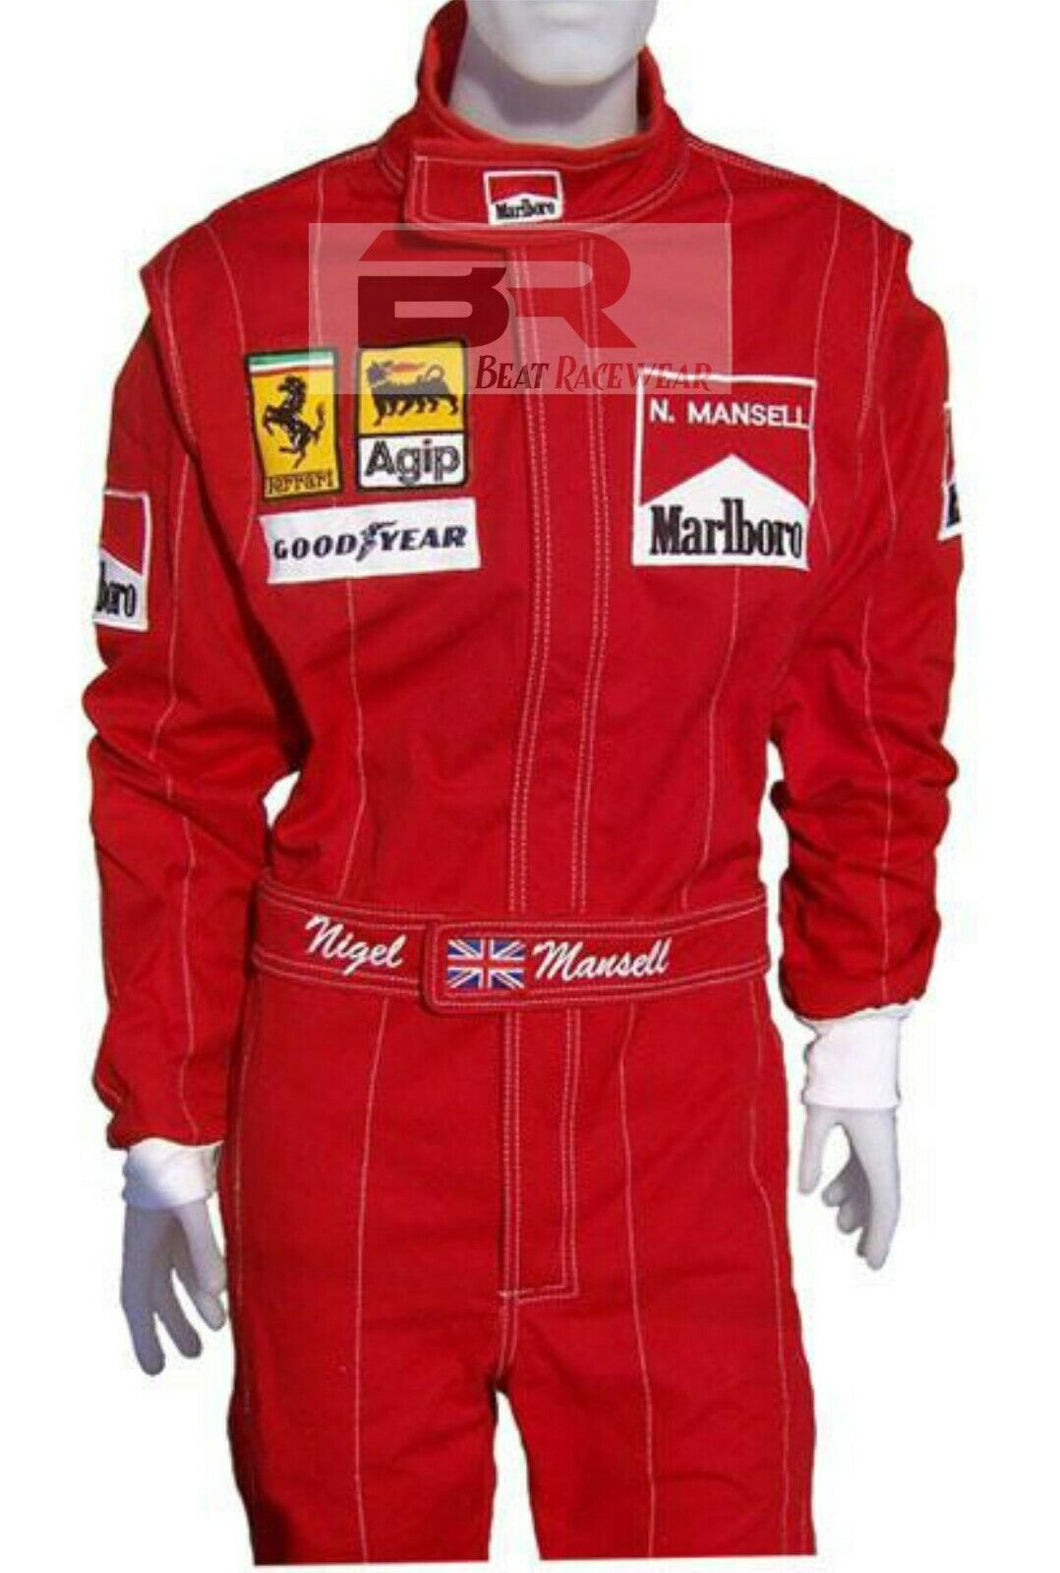 Nigel Mansell 1991 Embroidered Patches go kart racing suit In All Sizes